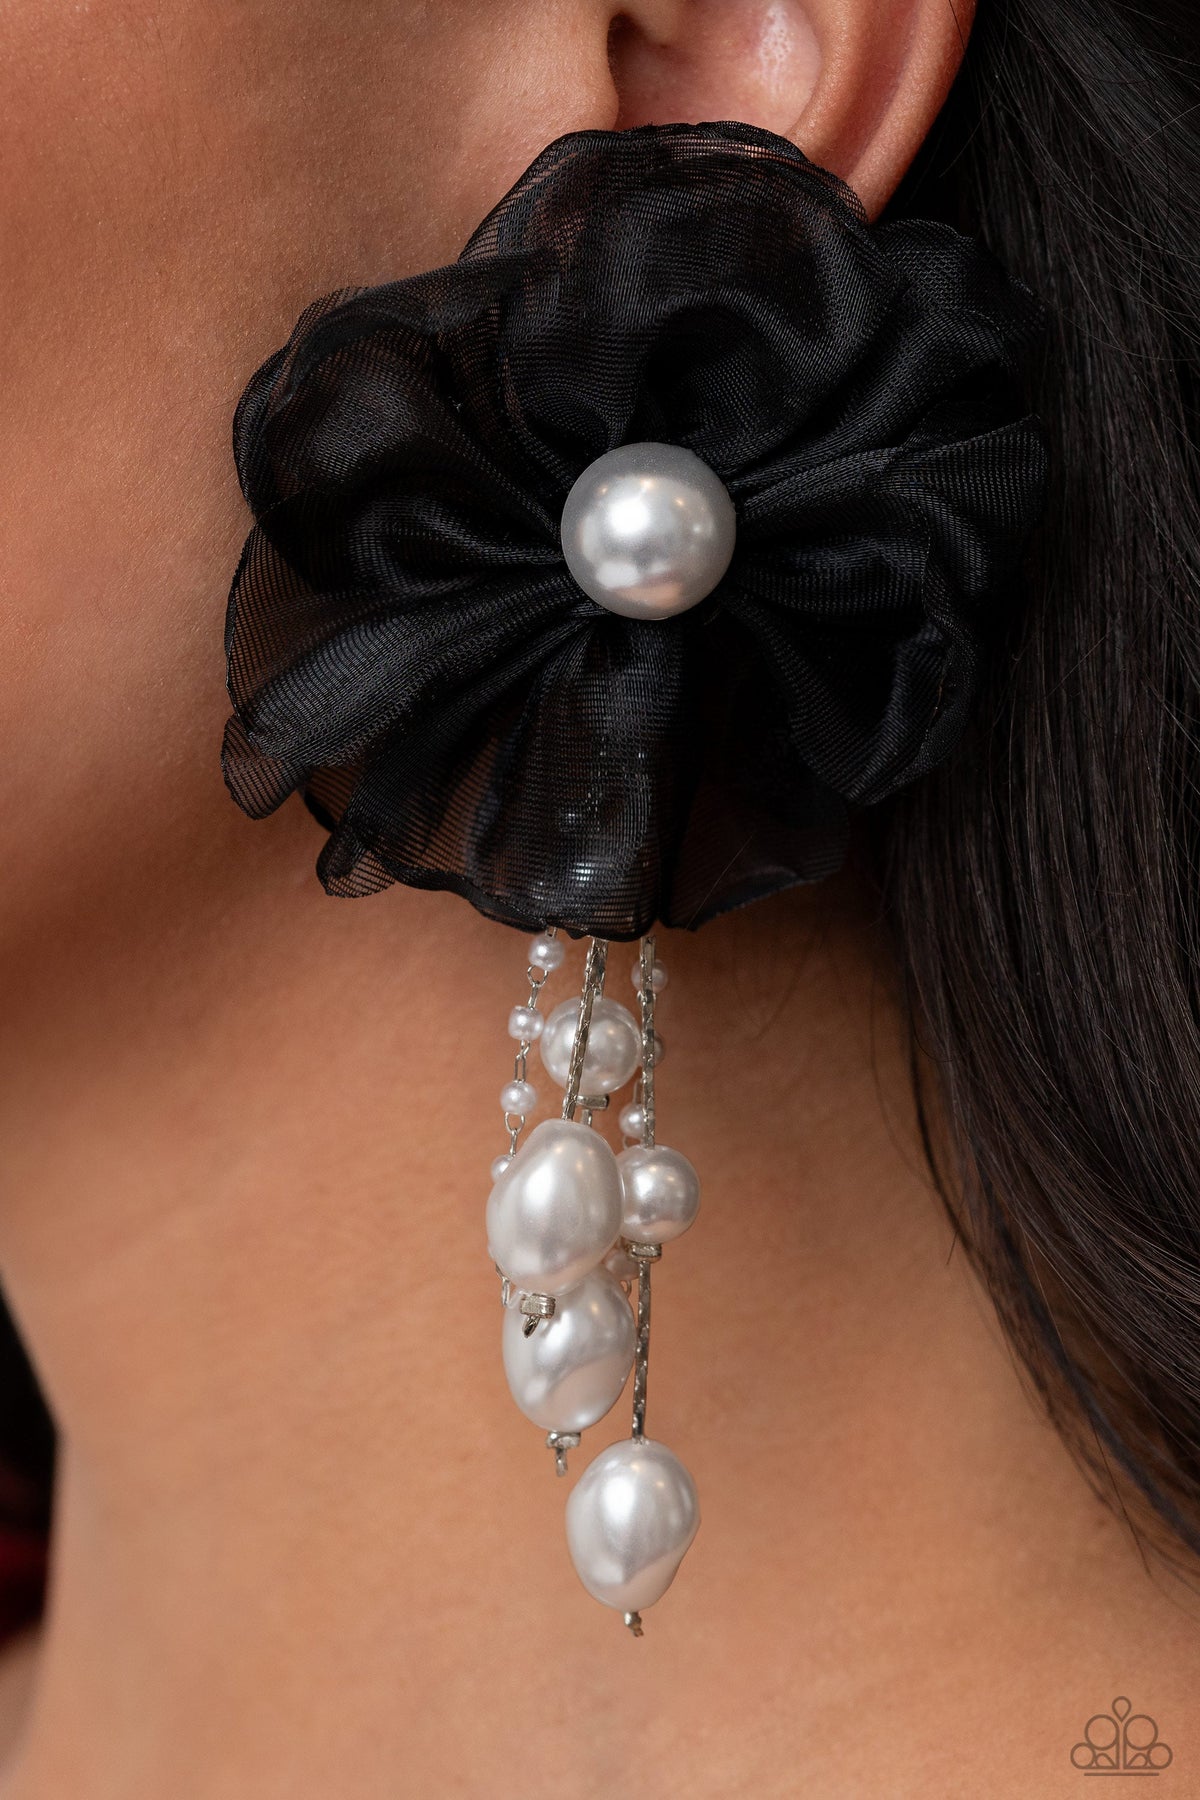 Dipping in Decadence Black Silk &amp; White Pearl Earrings - Paparazzi Accessories-on model - CarasShop.com - $5 Jewelry by Cara Jewels